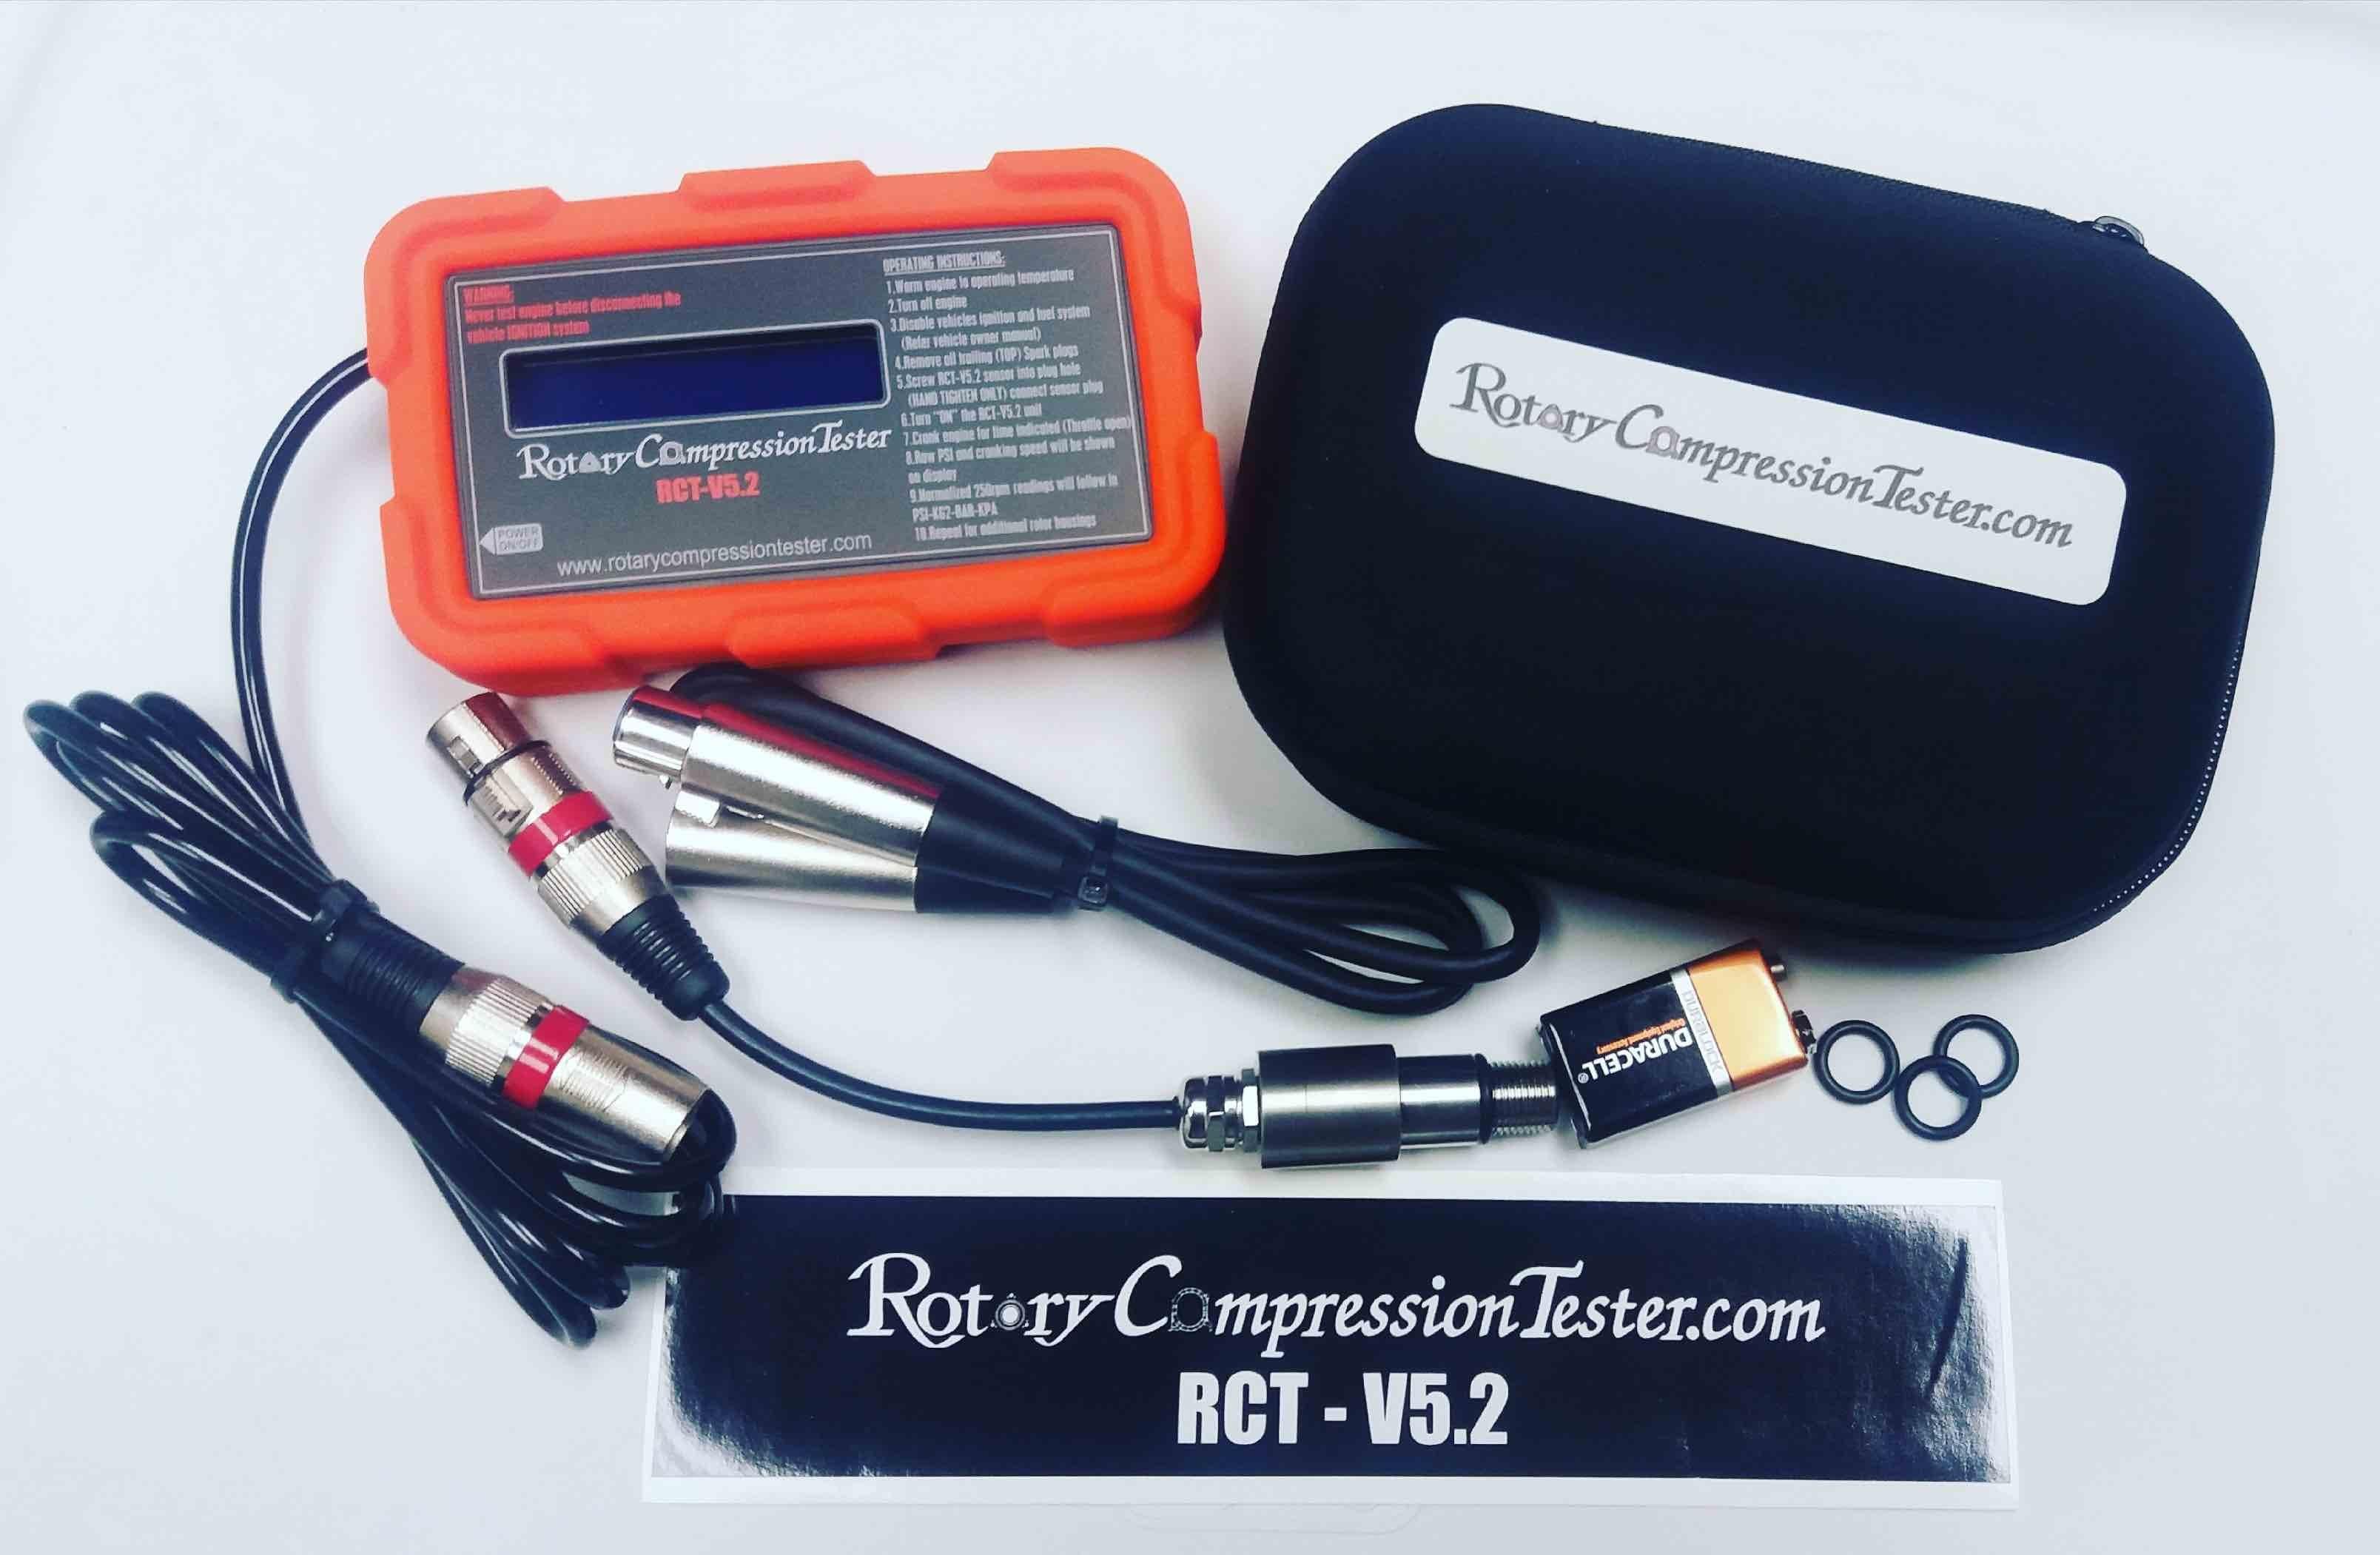 Rotary Compression Tester RCTV5.2 from Tuned By Shawn